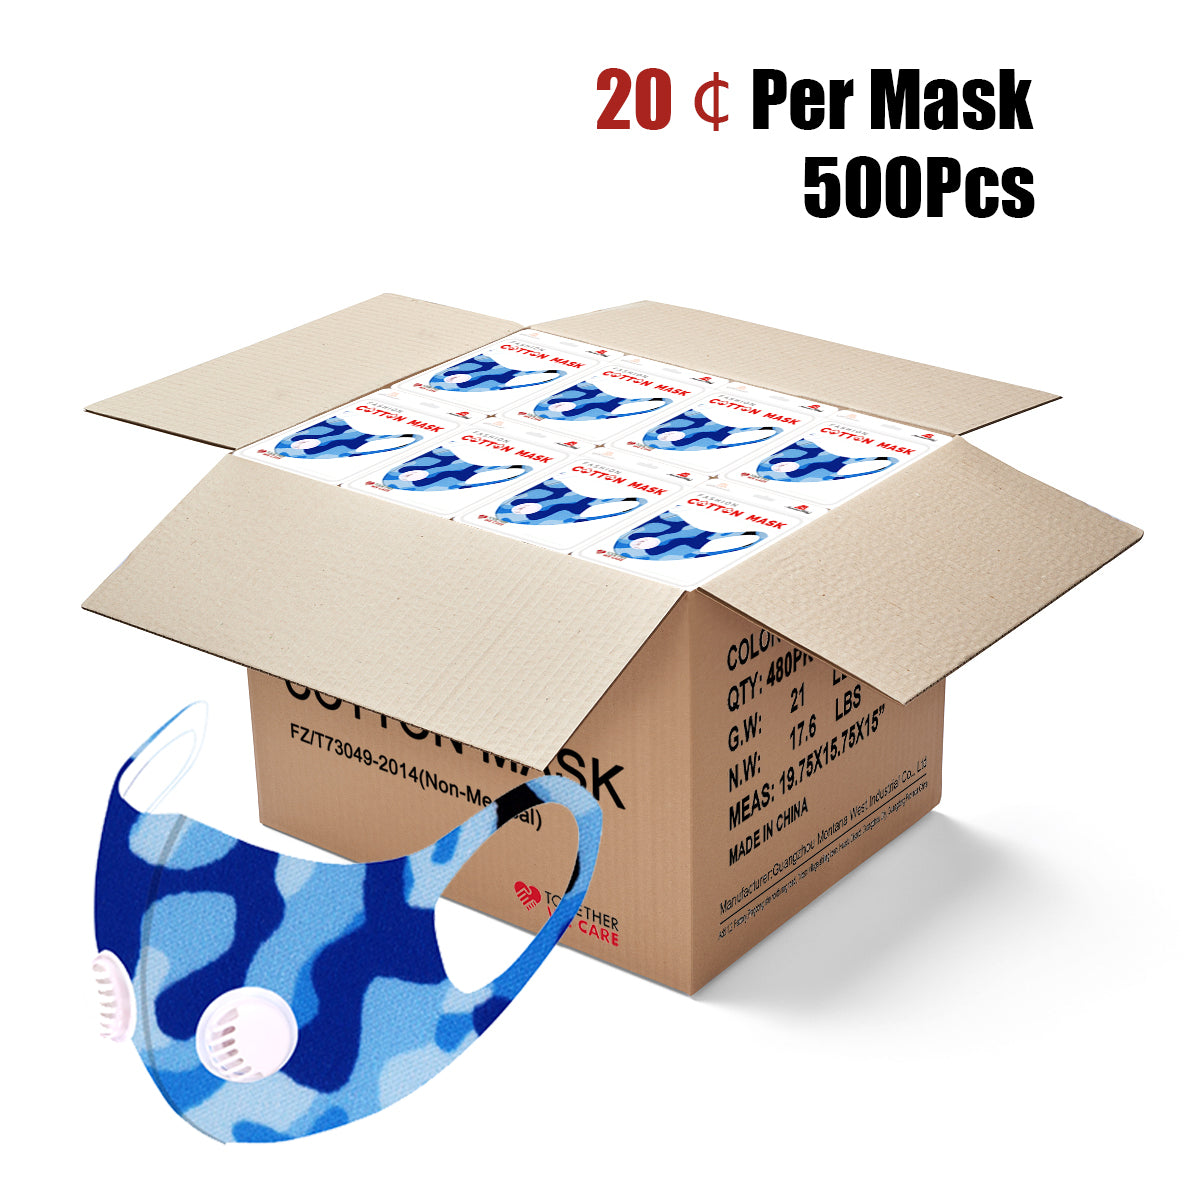 500Pcs Dust Mask with Double Filters, 100% Cotton Comfy Breathable Outdoor Face Protections,Blue camo print